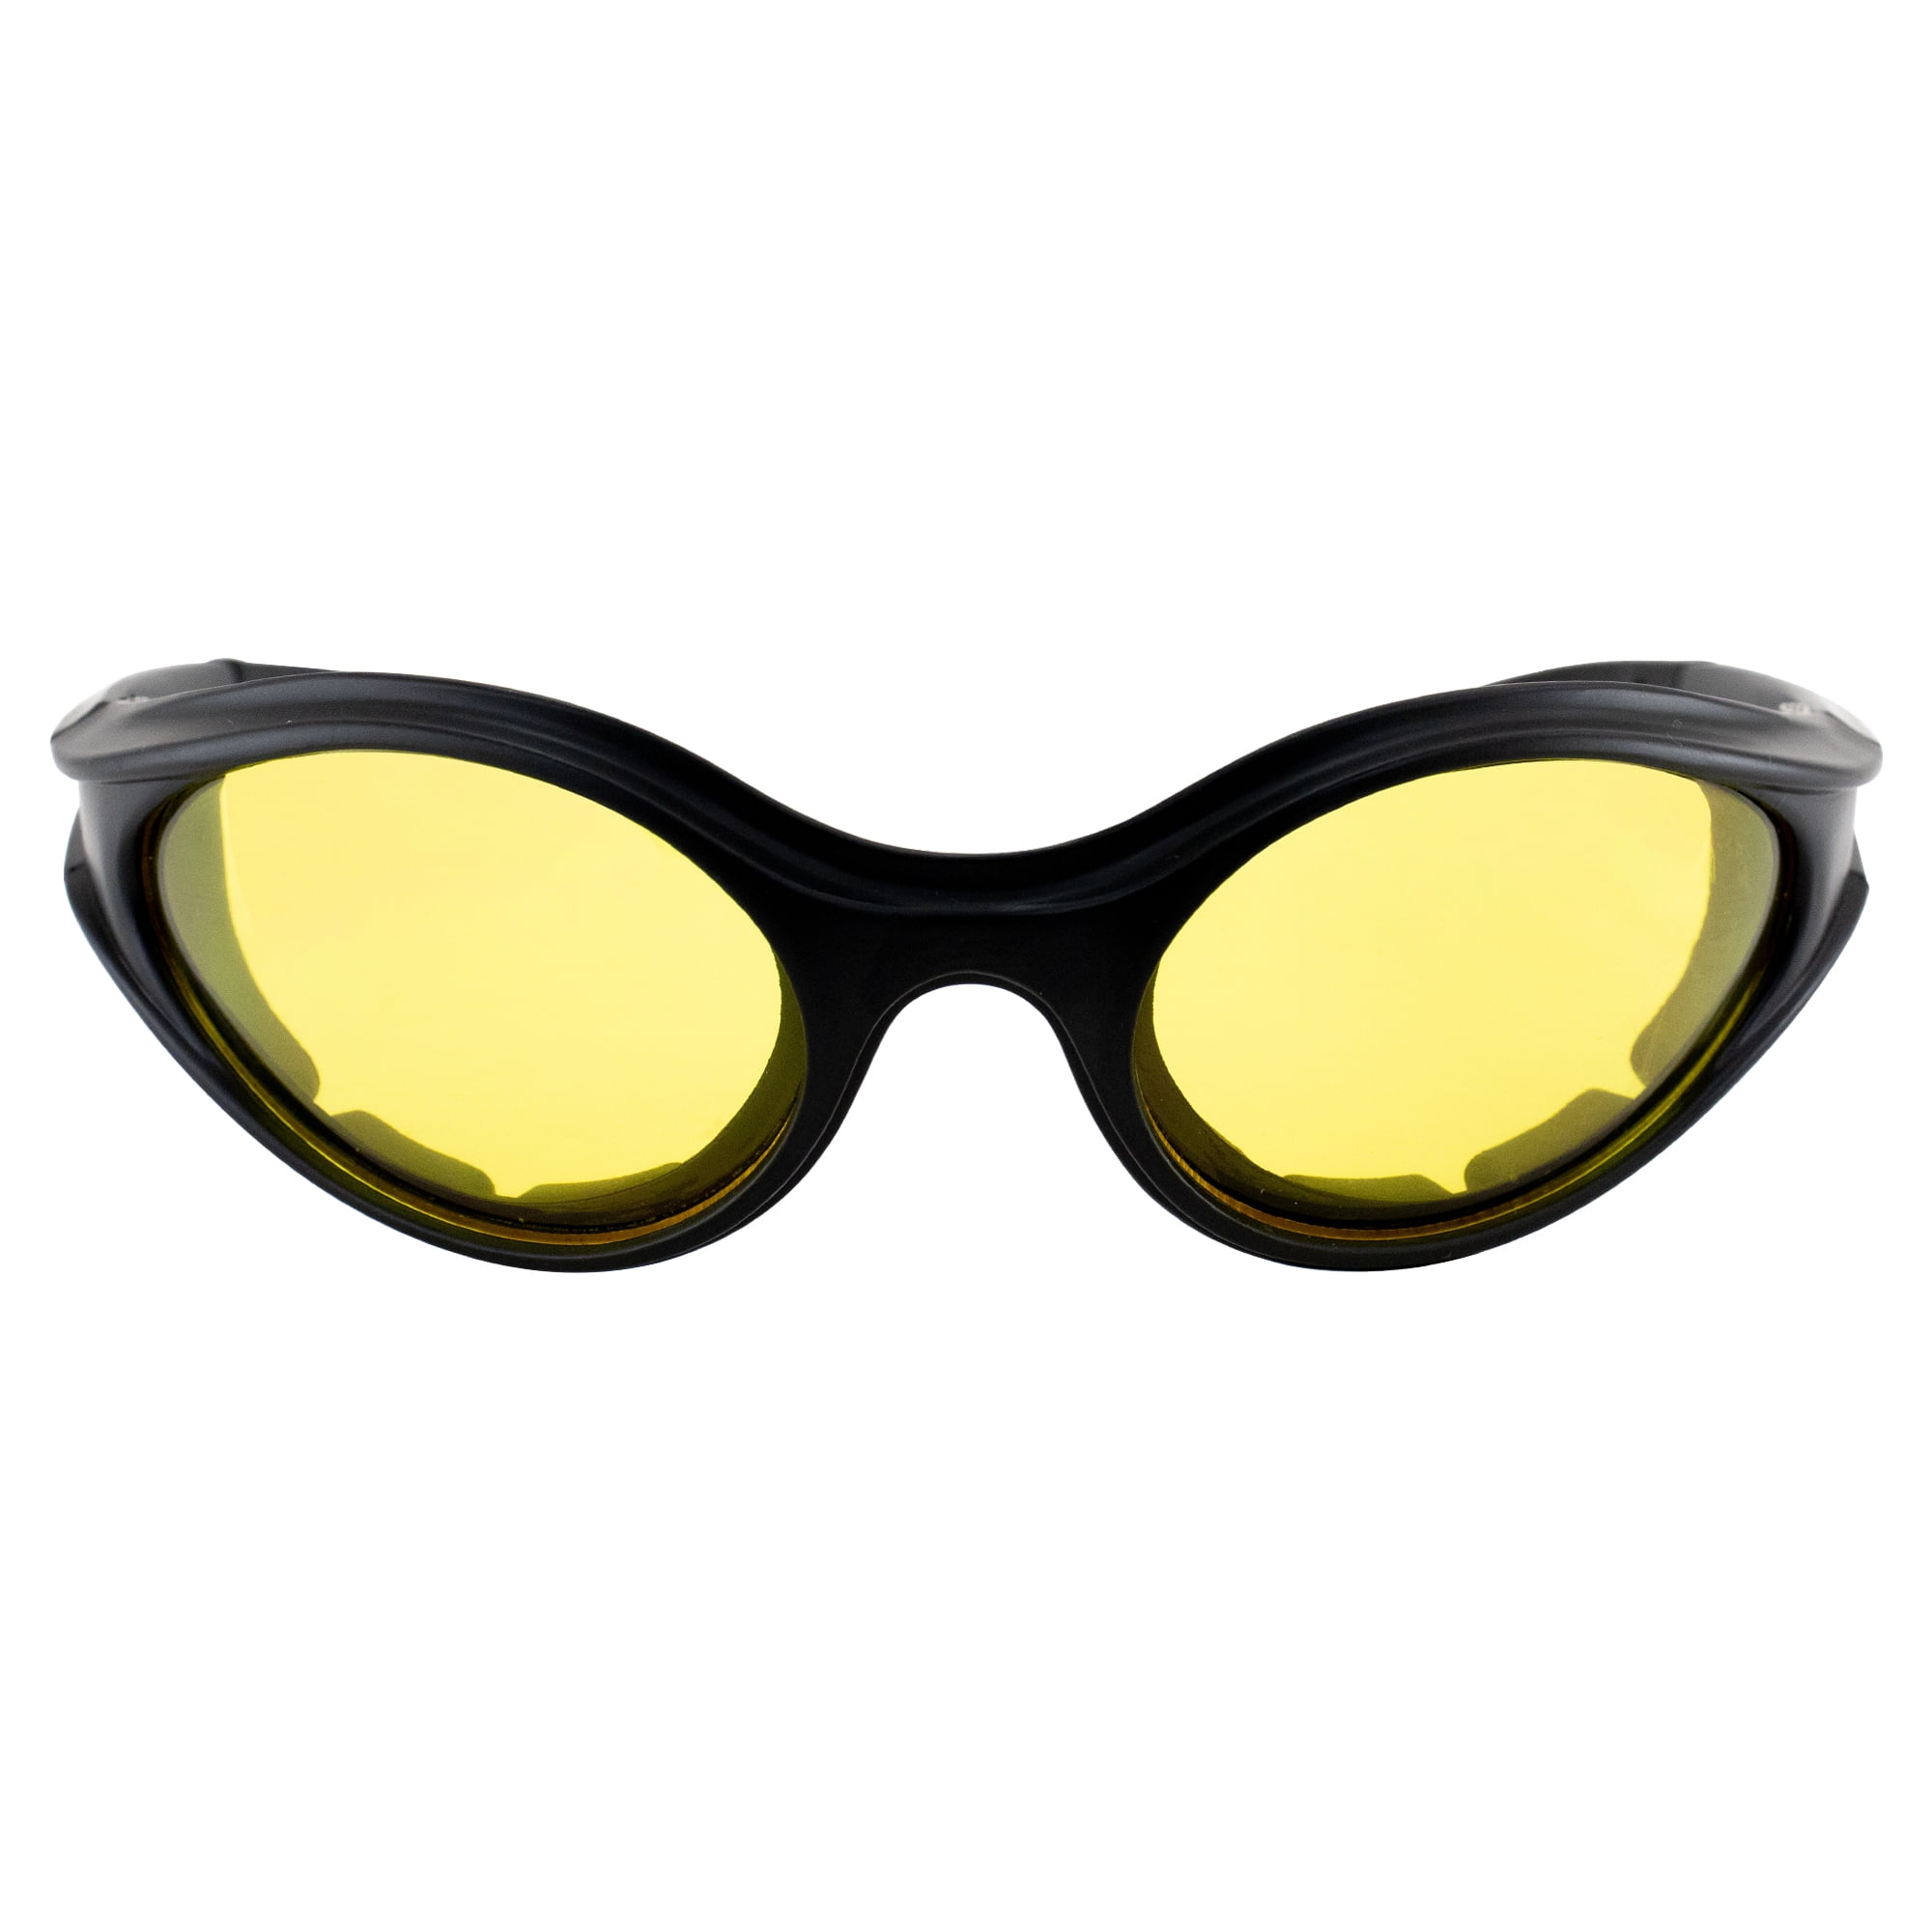 VERDSTER AIRDAM Polarized Sunglasses for Men - UV Protection, Comfortable  Foam Padded Wraparound Design - Yellow Night Riding Lenses - Case, Pouch &  Cleaning Cloth Included : : Clothing & Accessories